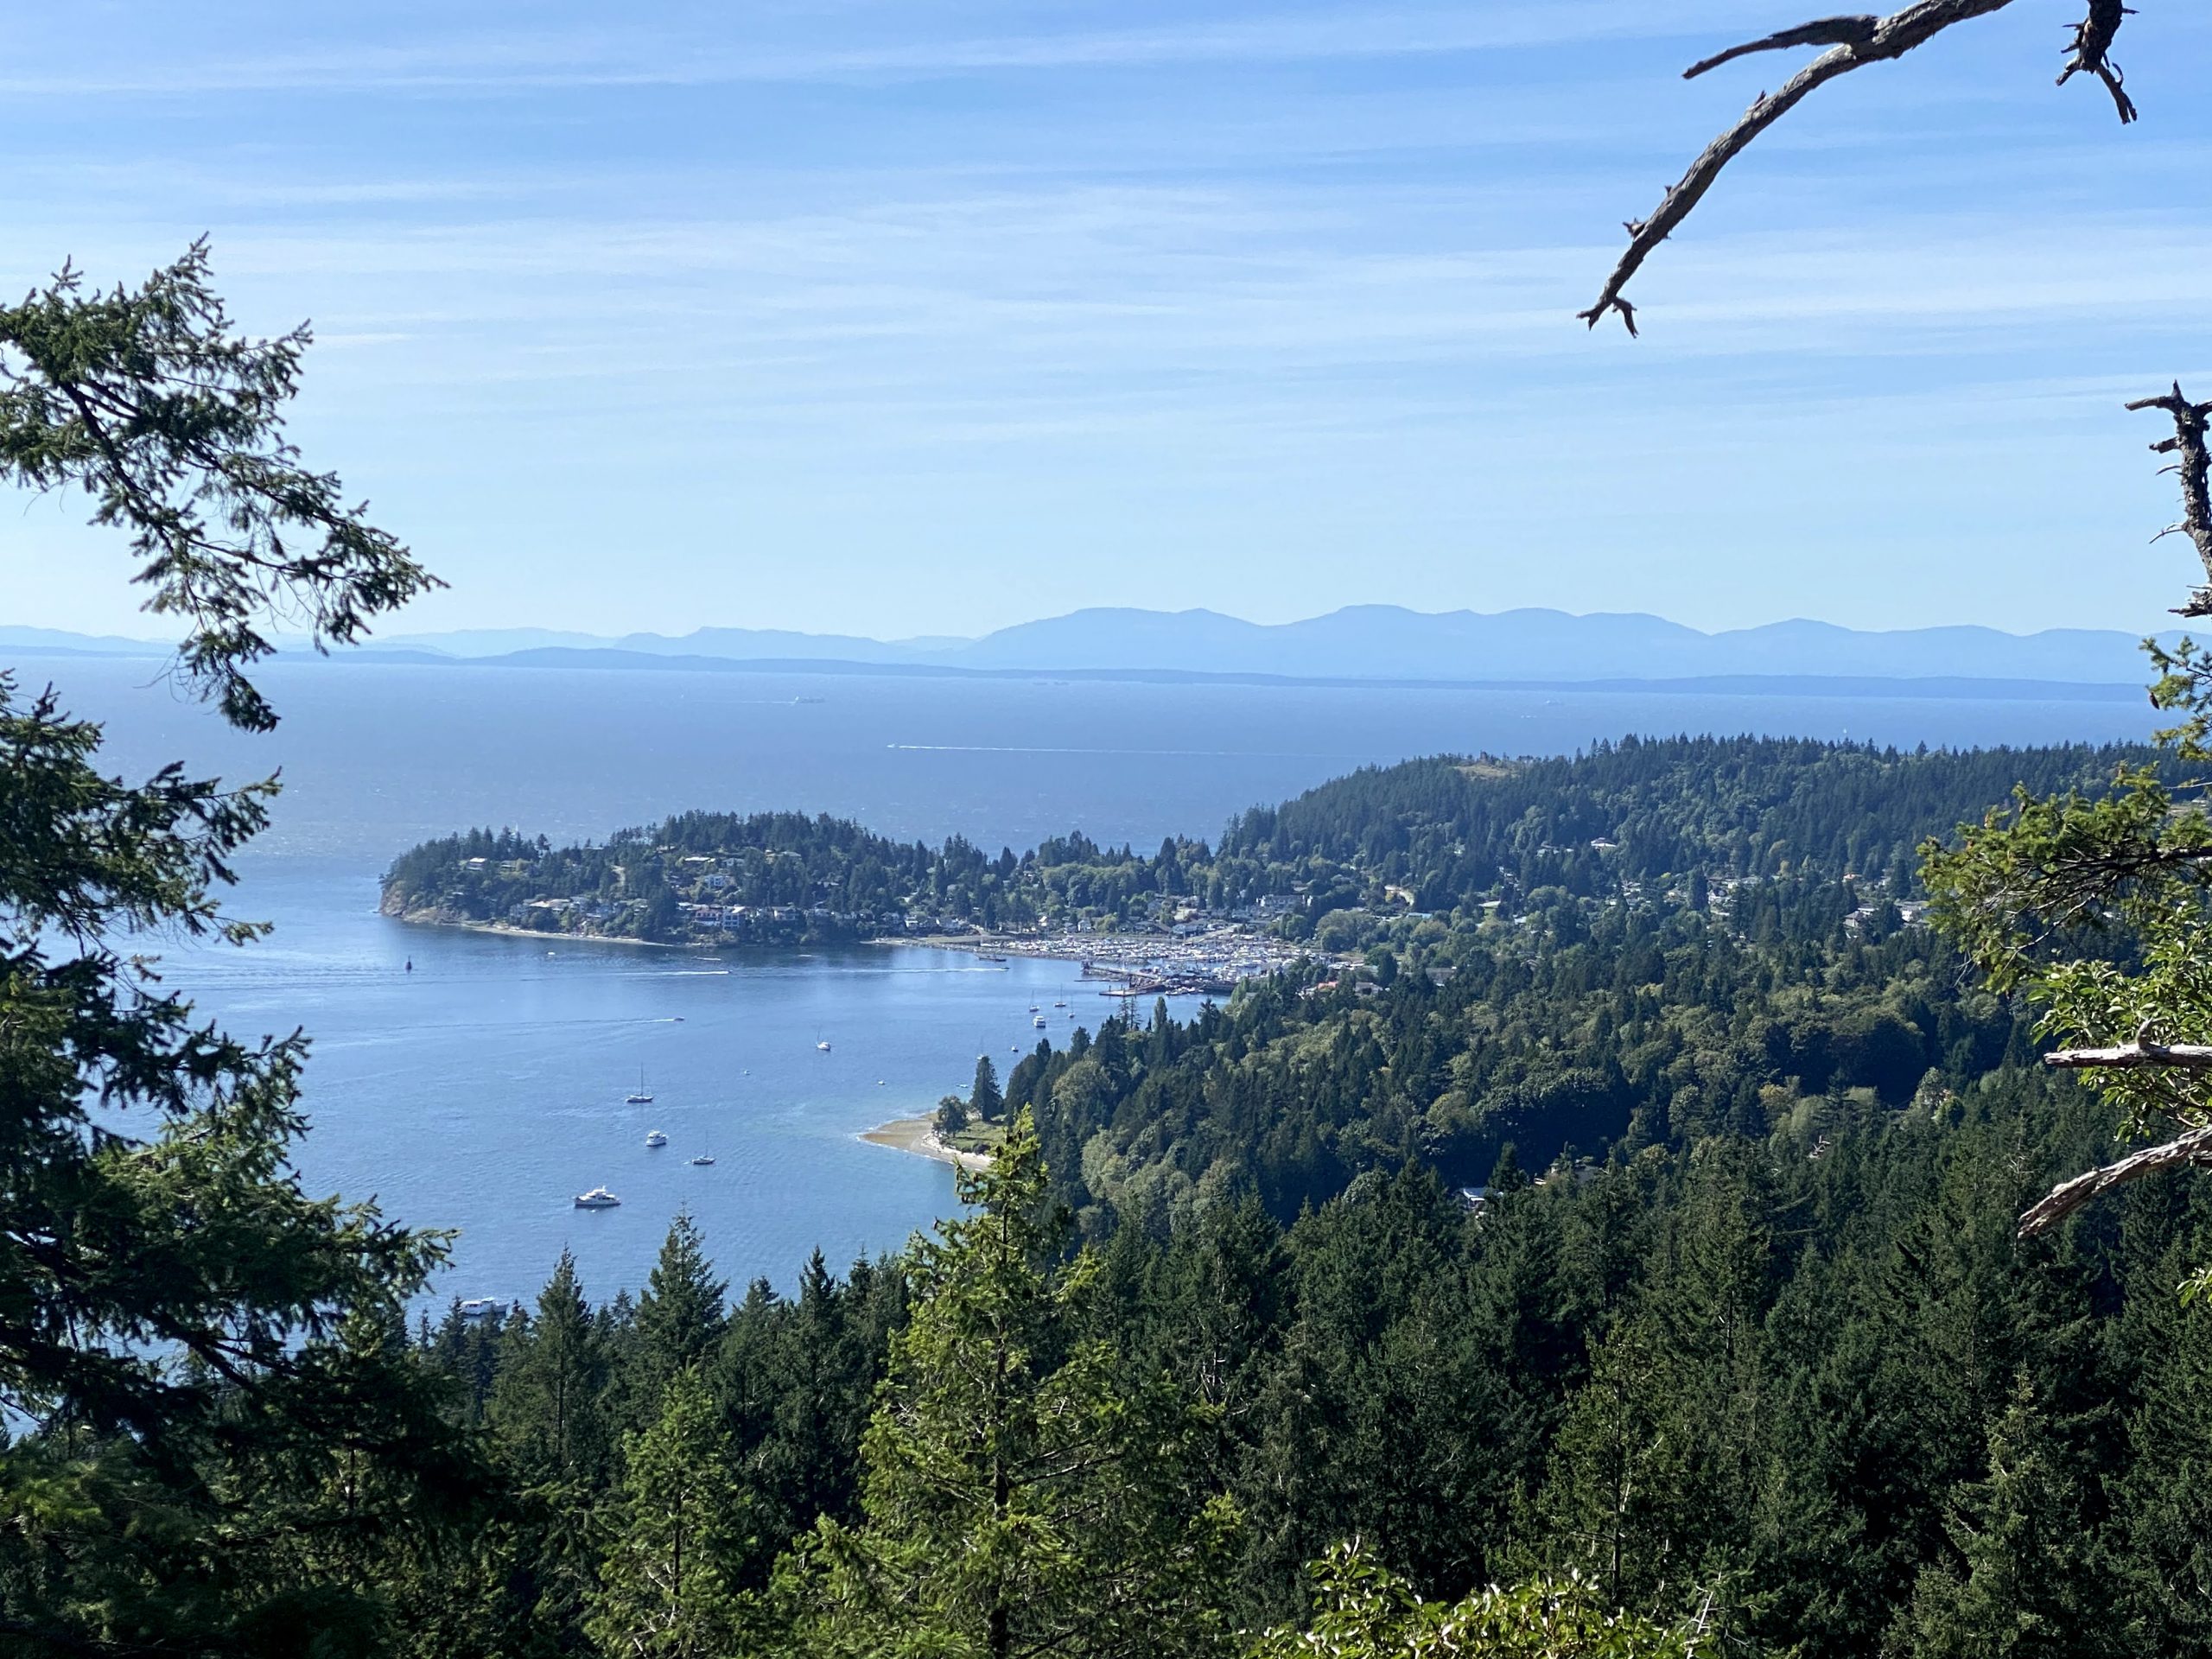 A view of Gibsons from atop Soames Hill